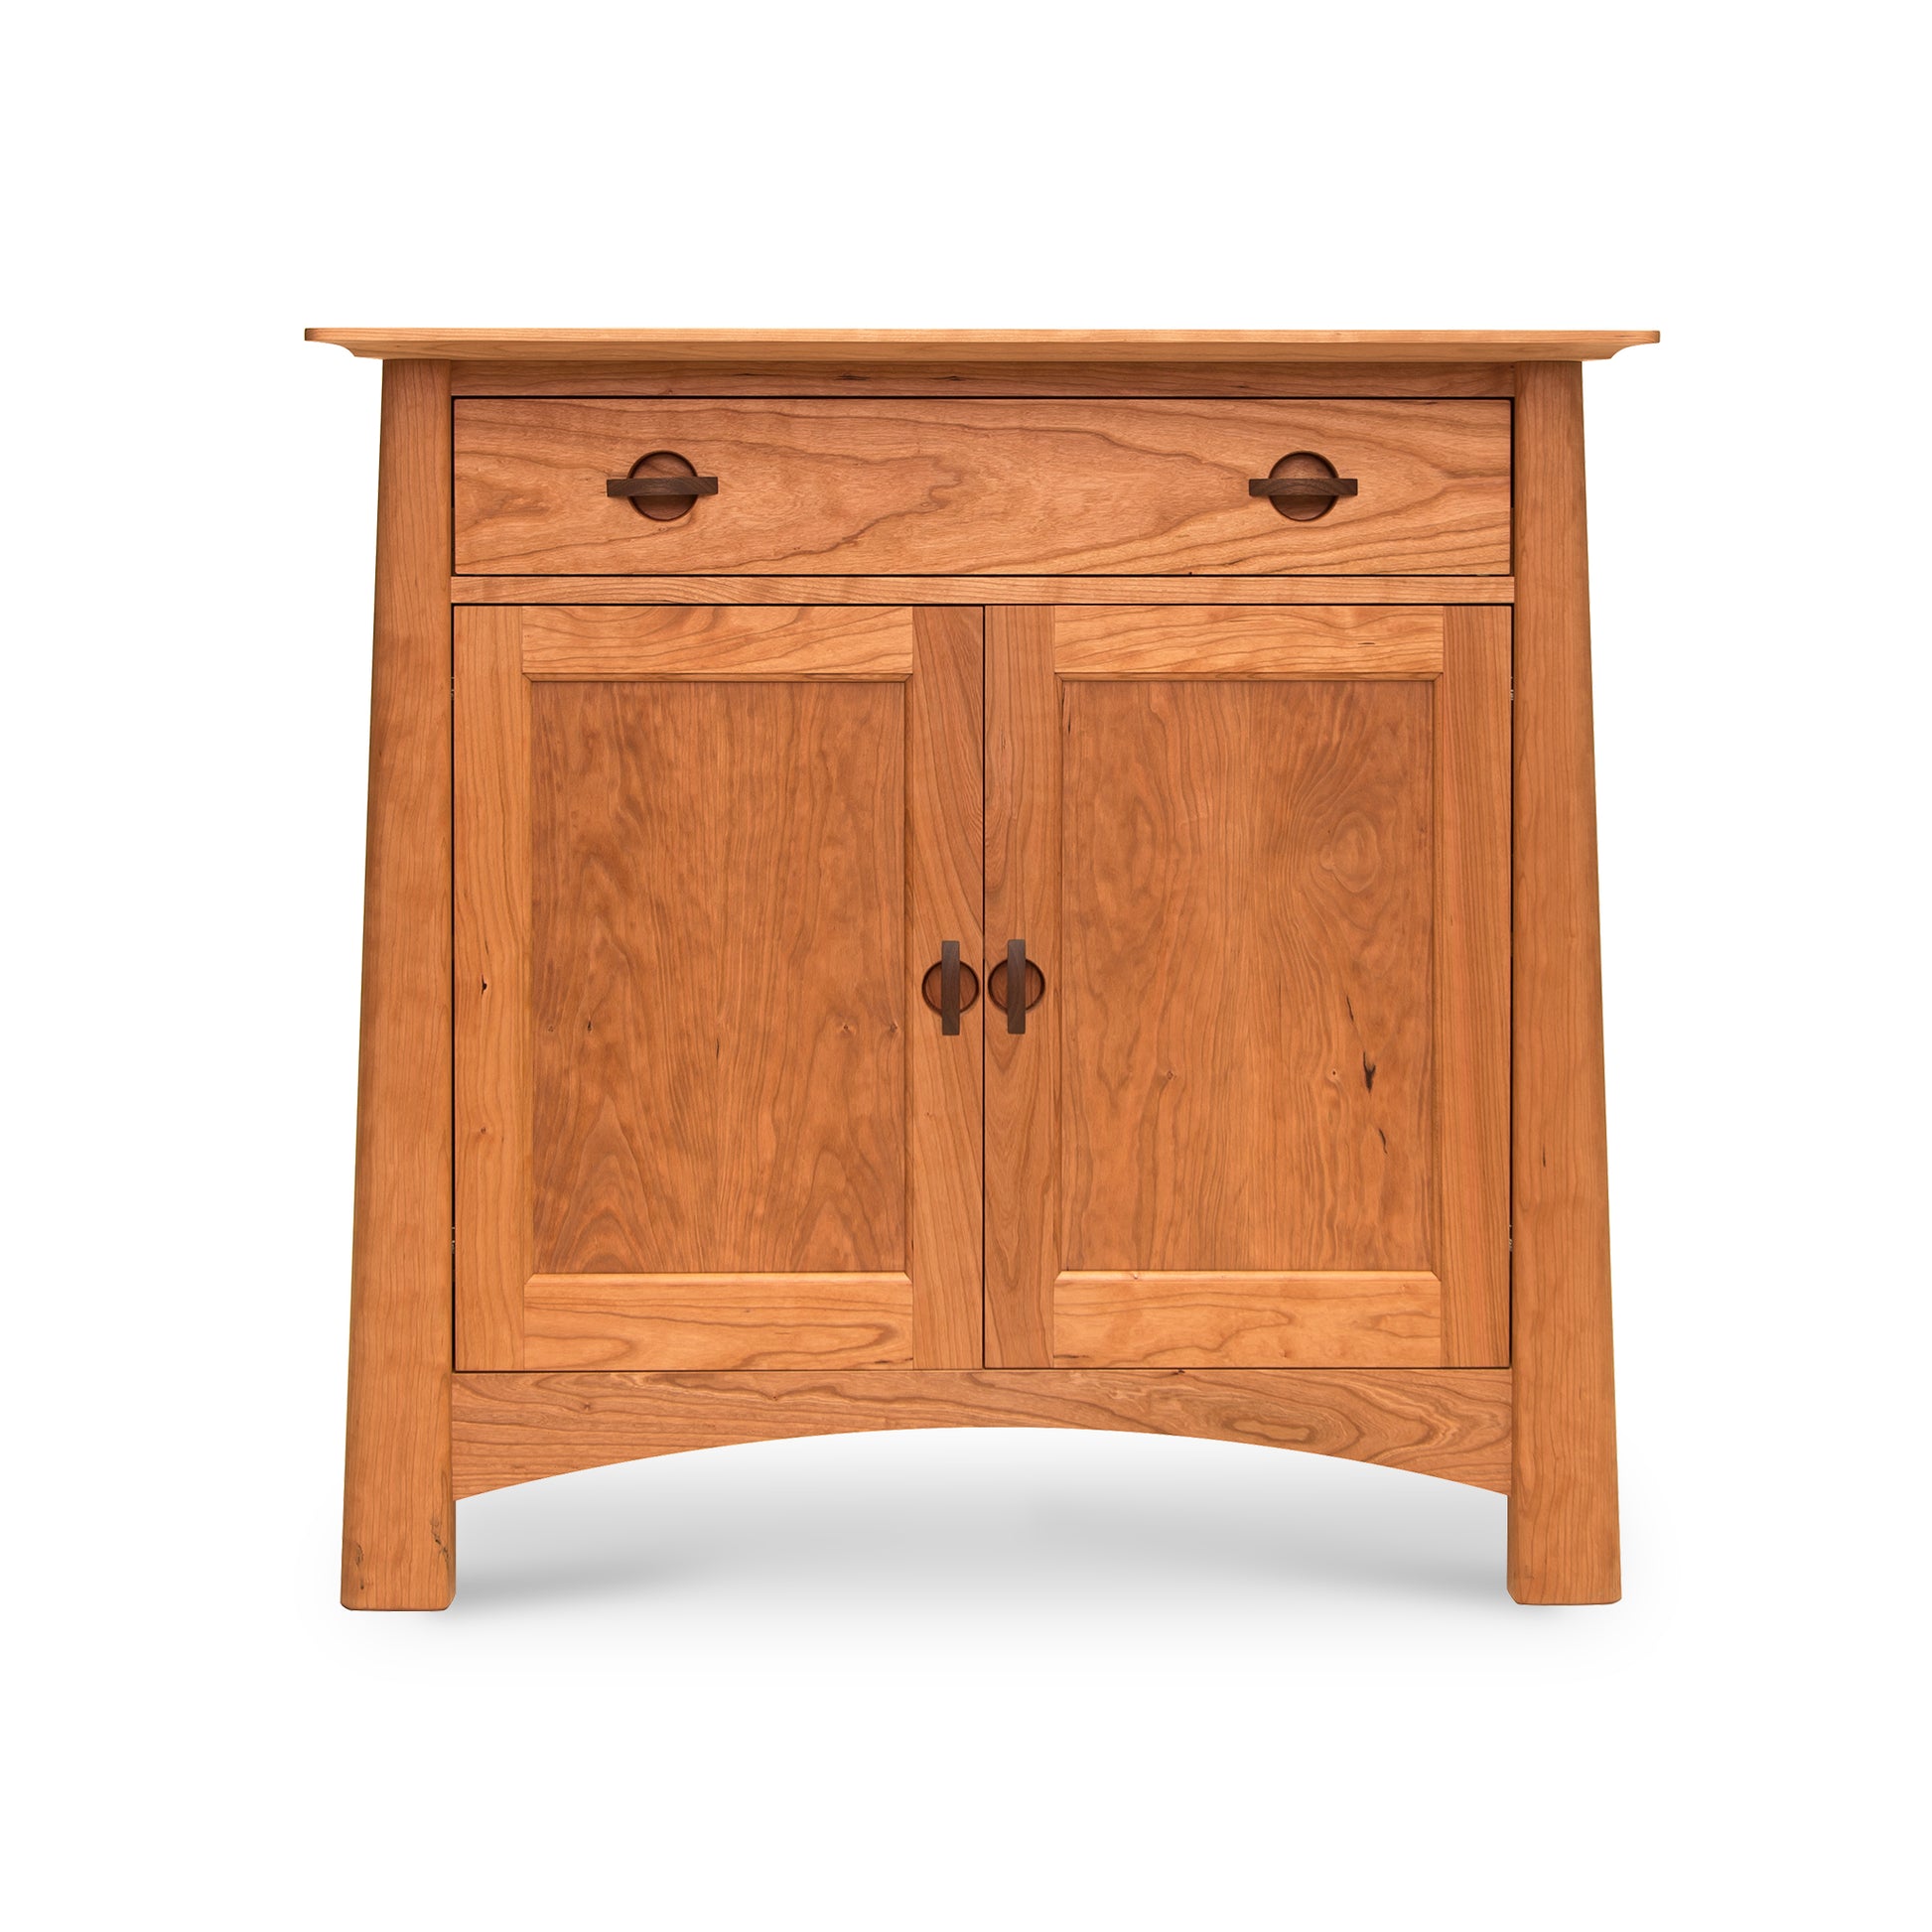 A Maple Corner Woodworks Cherry Moon Small 38" Sideboard with a solid hardwood cabinet with a smooth, eco-friendly oil finish, featuring two doors and a single drawer, all with round, dark knobs. The sideboard is set against a solid white background.